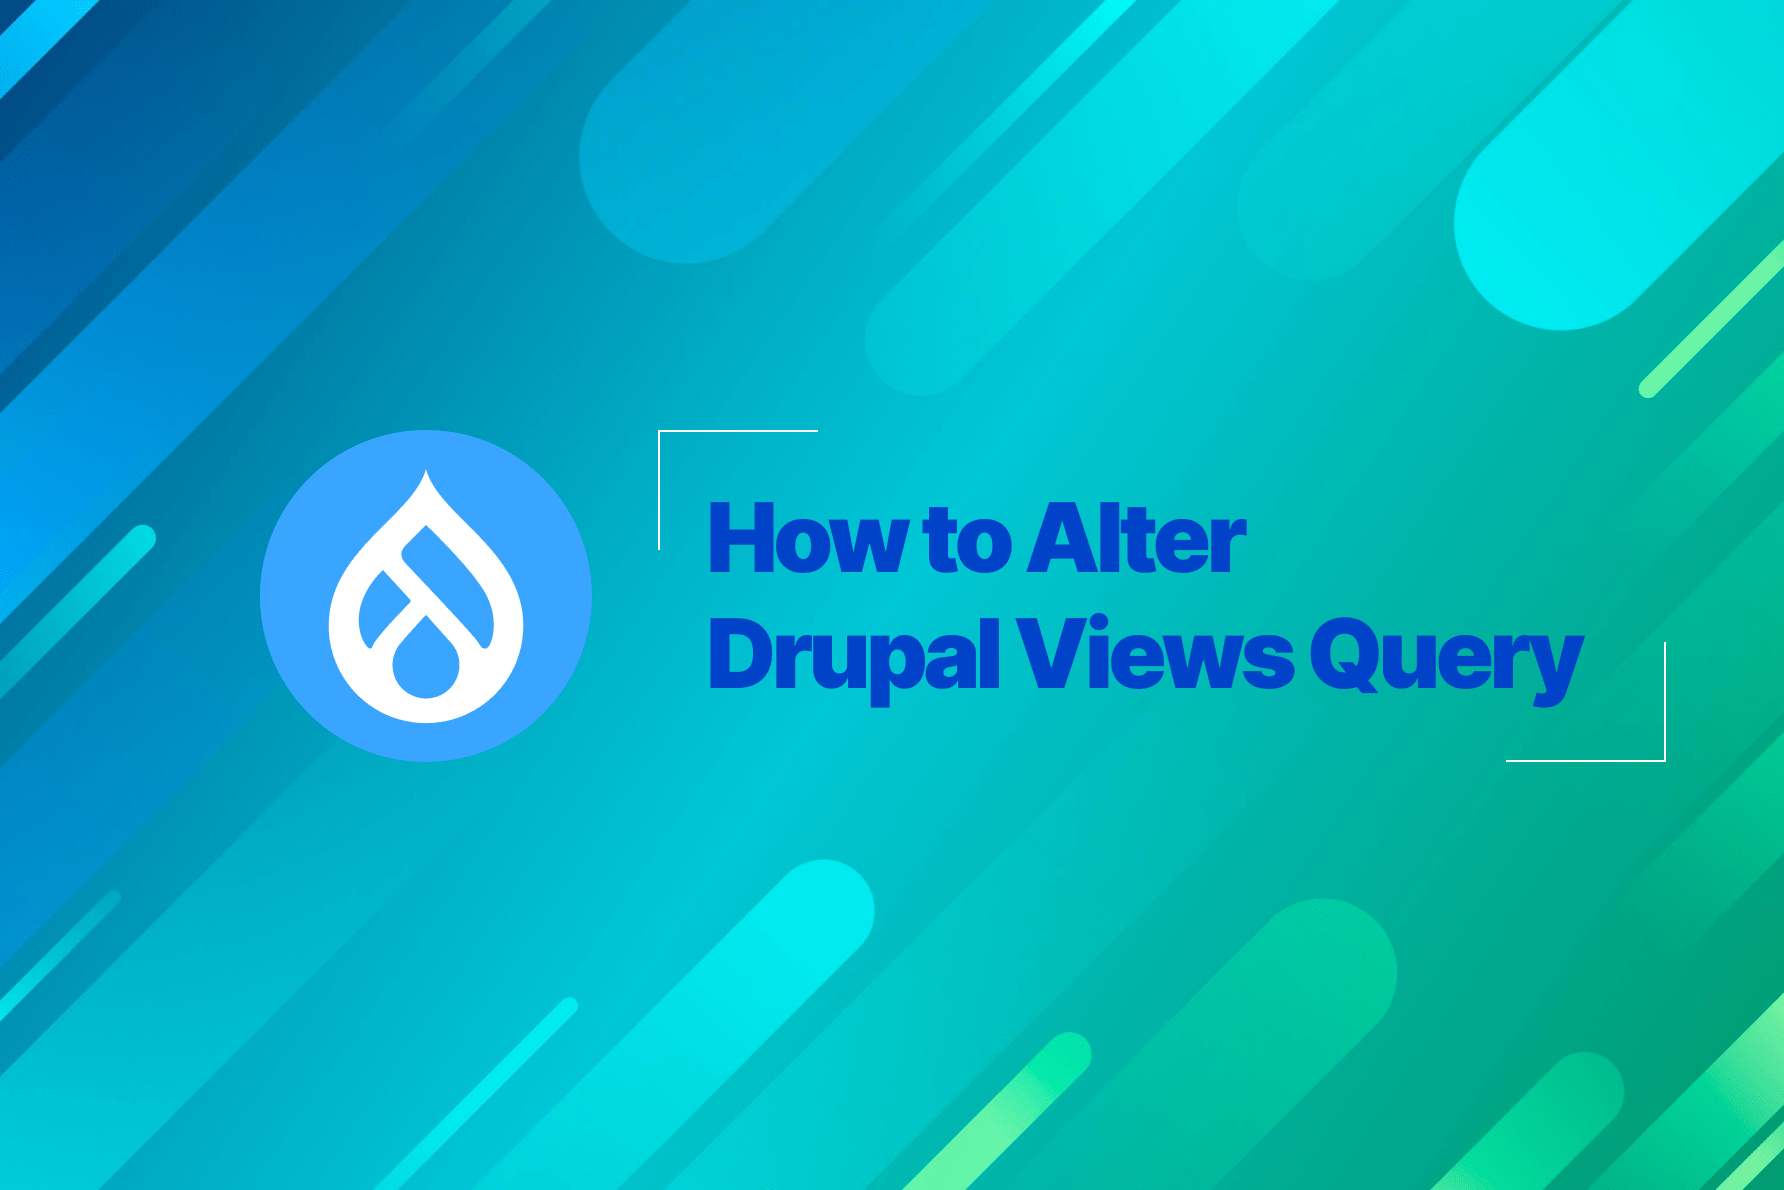 How to Alter Drupal Views Query